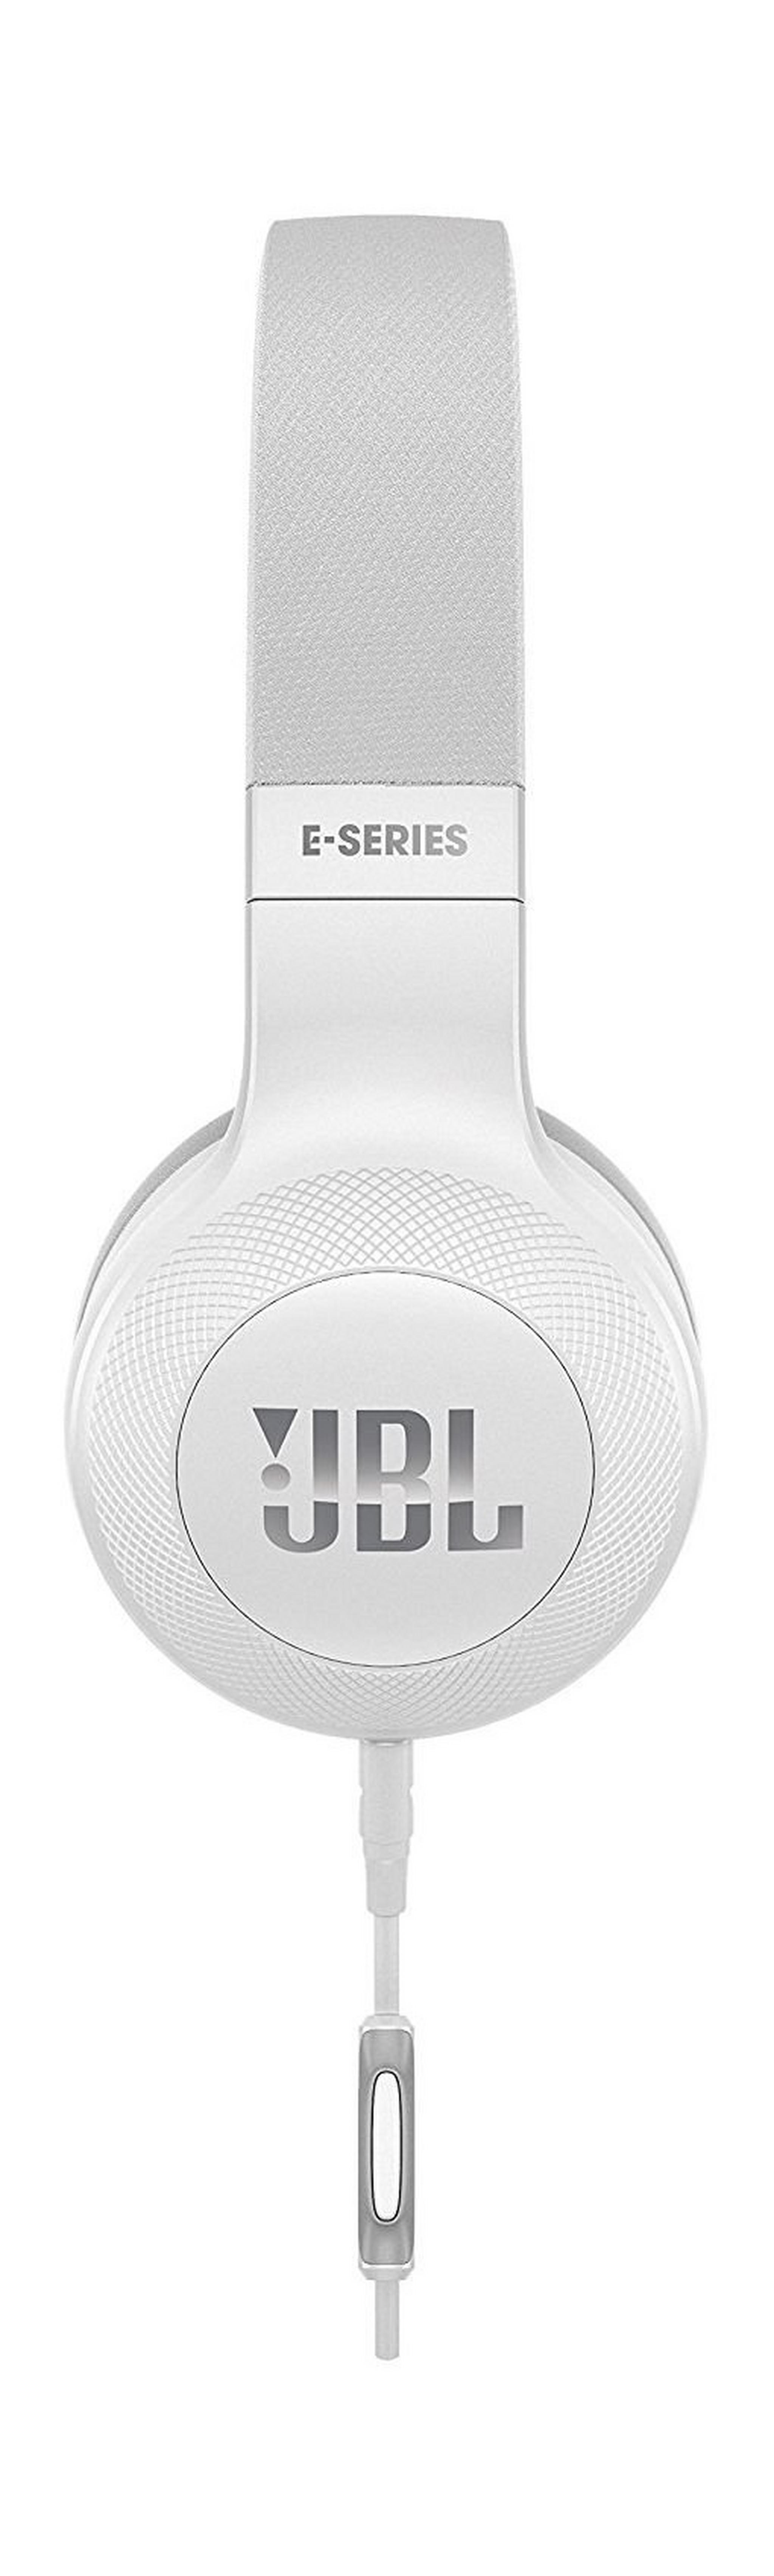 JBL E35 Over-Ear Wired Headphone with Microphone - White